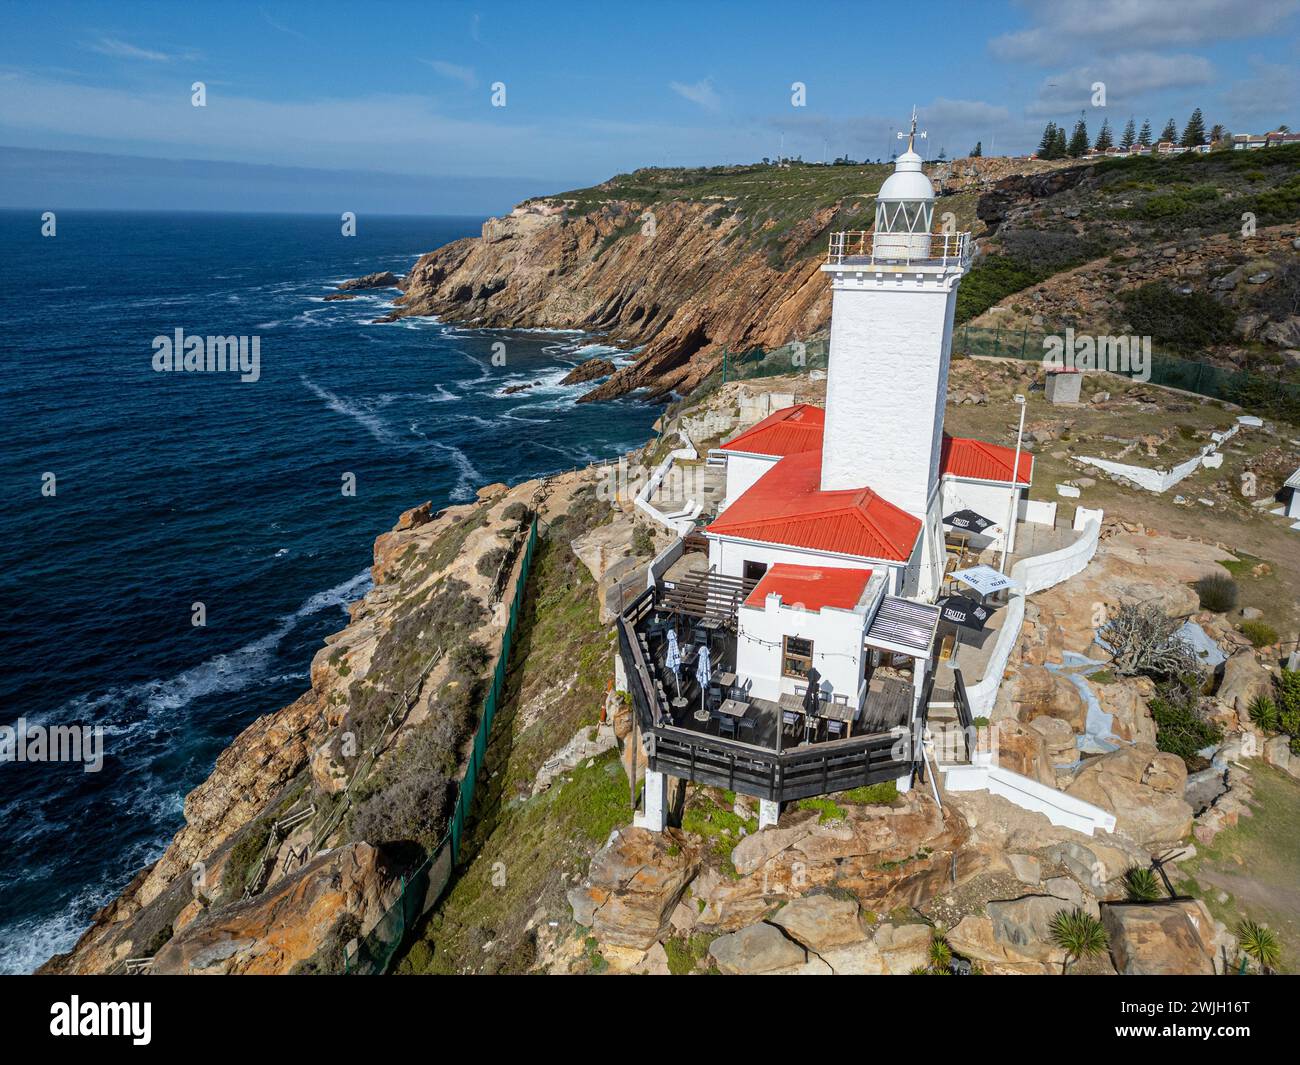 Cape St Blaize Lighthouse, Mossel Bay, Western Cape Province, Garden Route, South Africa Stock Photo